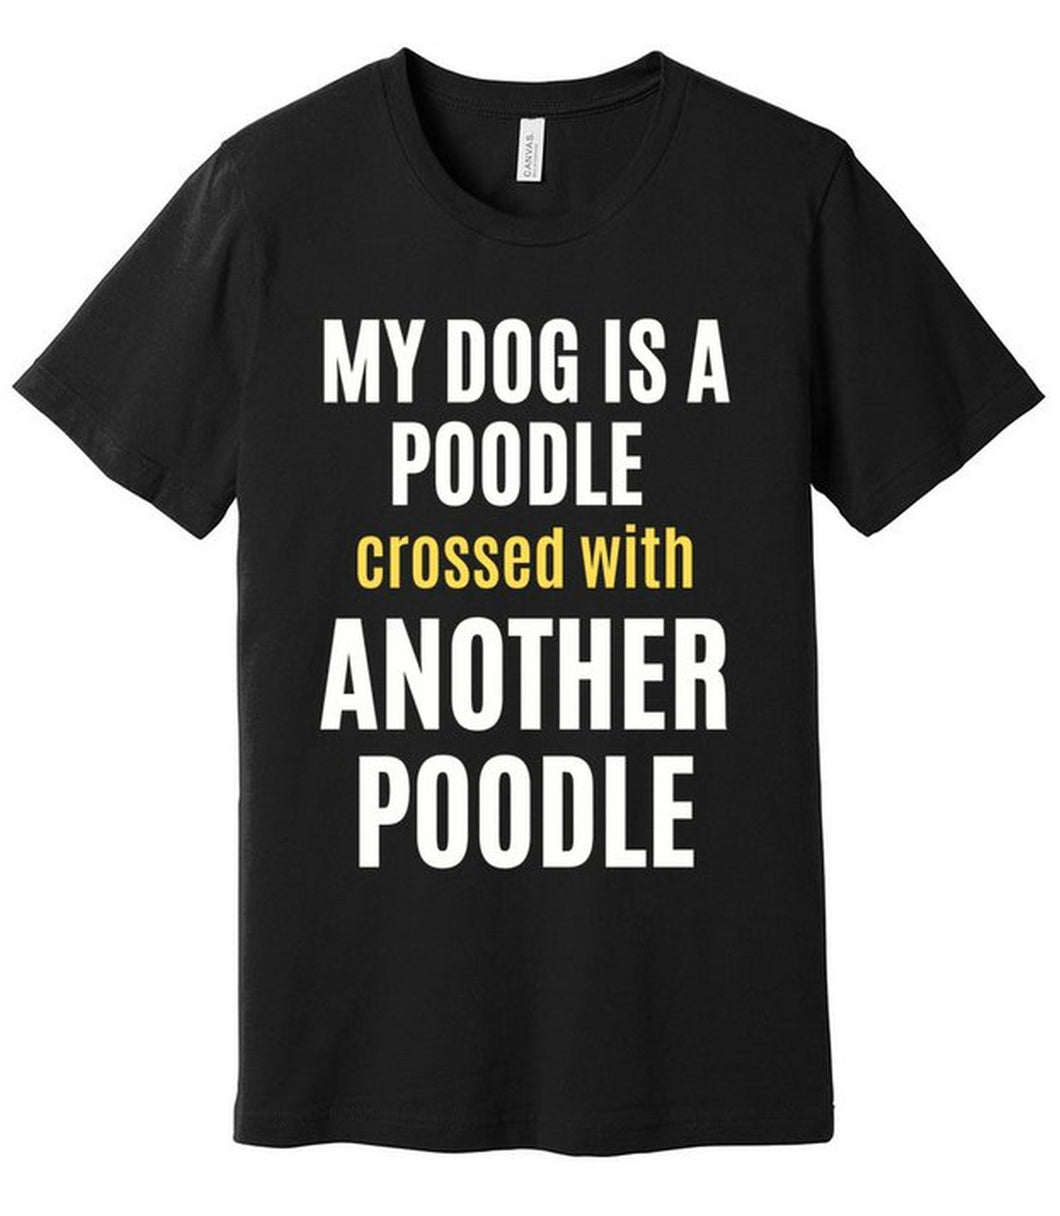 'My Dog is a Poodle Crossed with Another Poodle' Short Sleeve T-Shirt